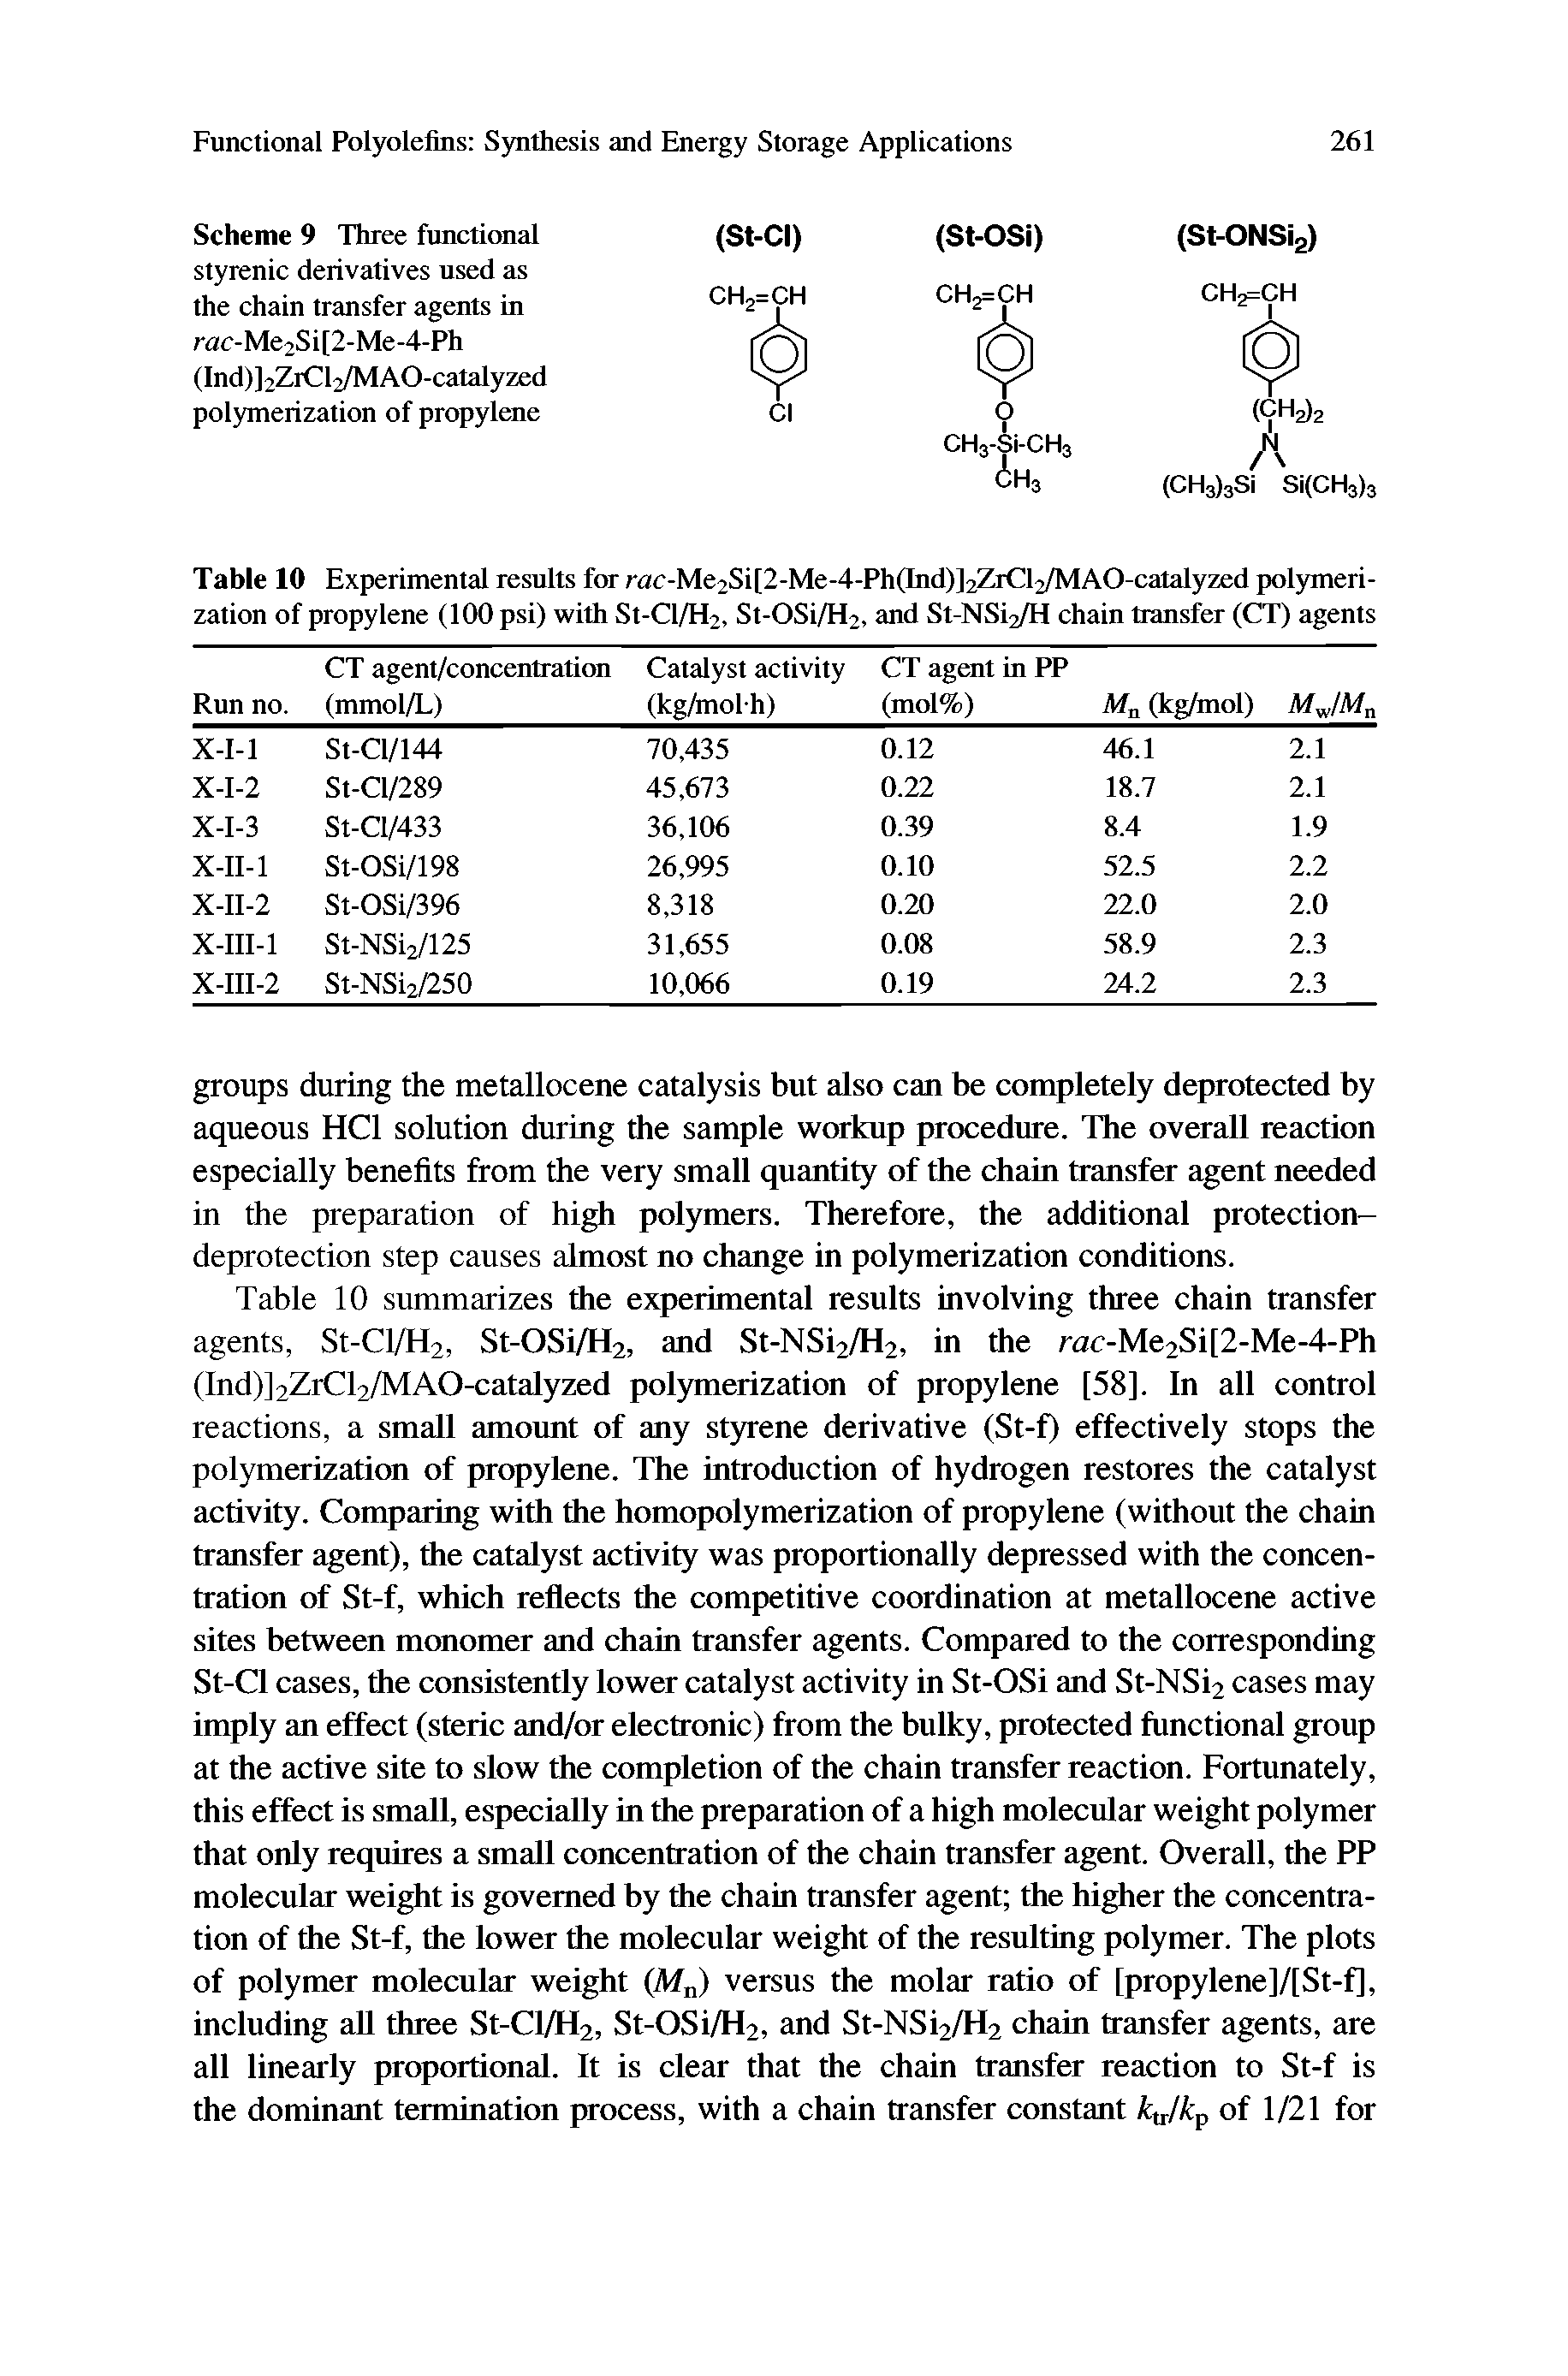 Table 10 Experimental results fra- rac-Me2Si[2-Me-4-Ph(Ind)]2ZrCl2/MAO-catalyzed polymerization of propylene (100 psi) with St-Cl/H2, St-OSi/H2, and St-NSi2/H chain transfer (CT) agents...